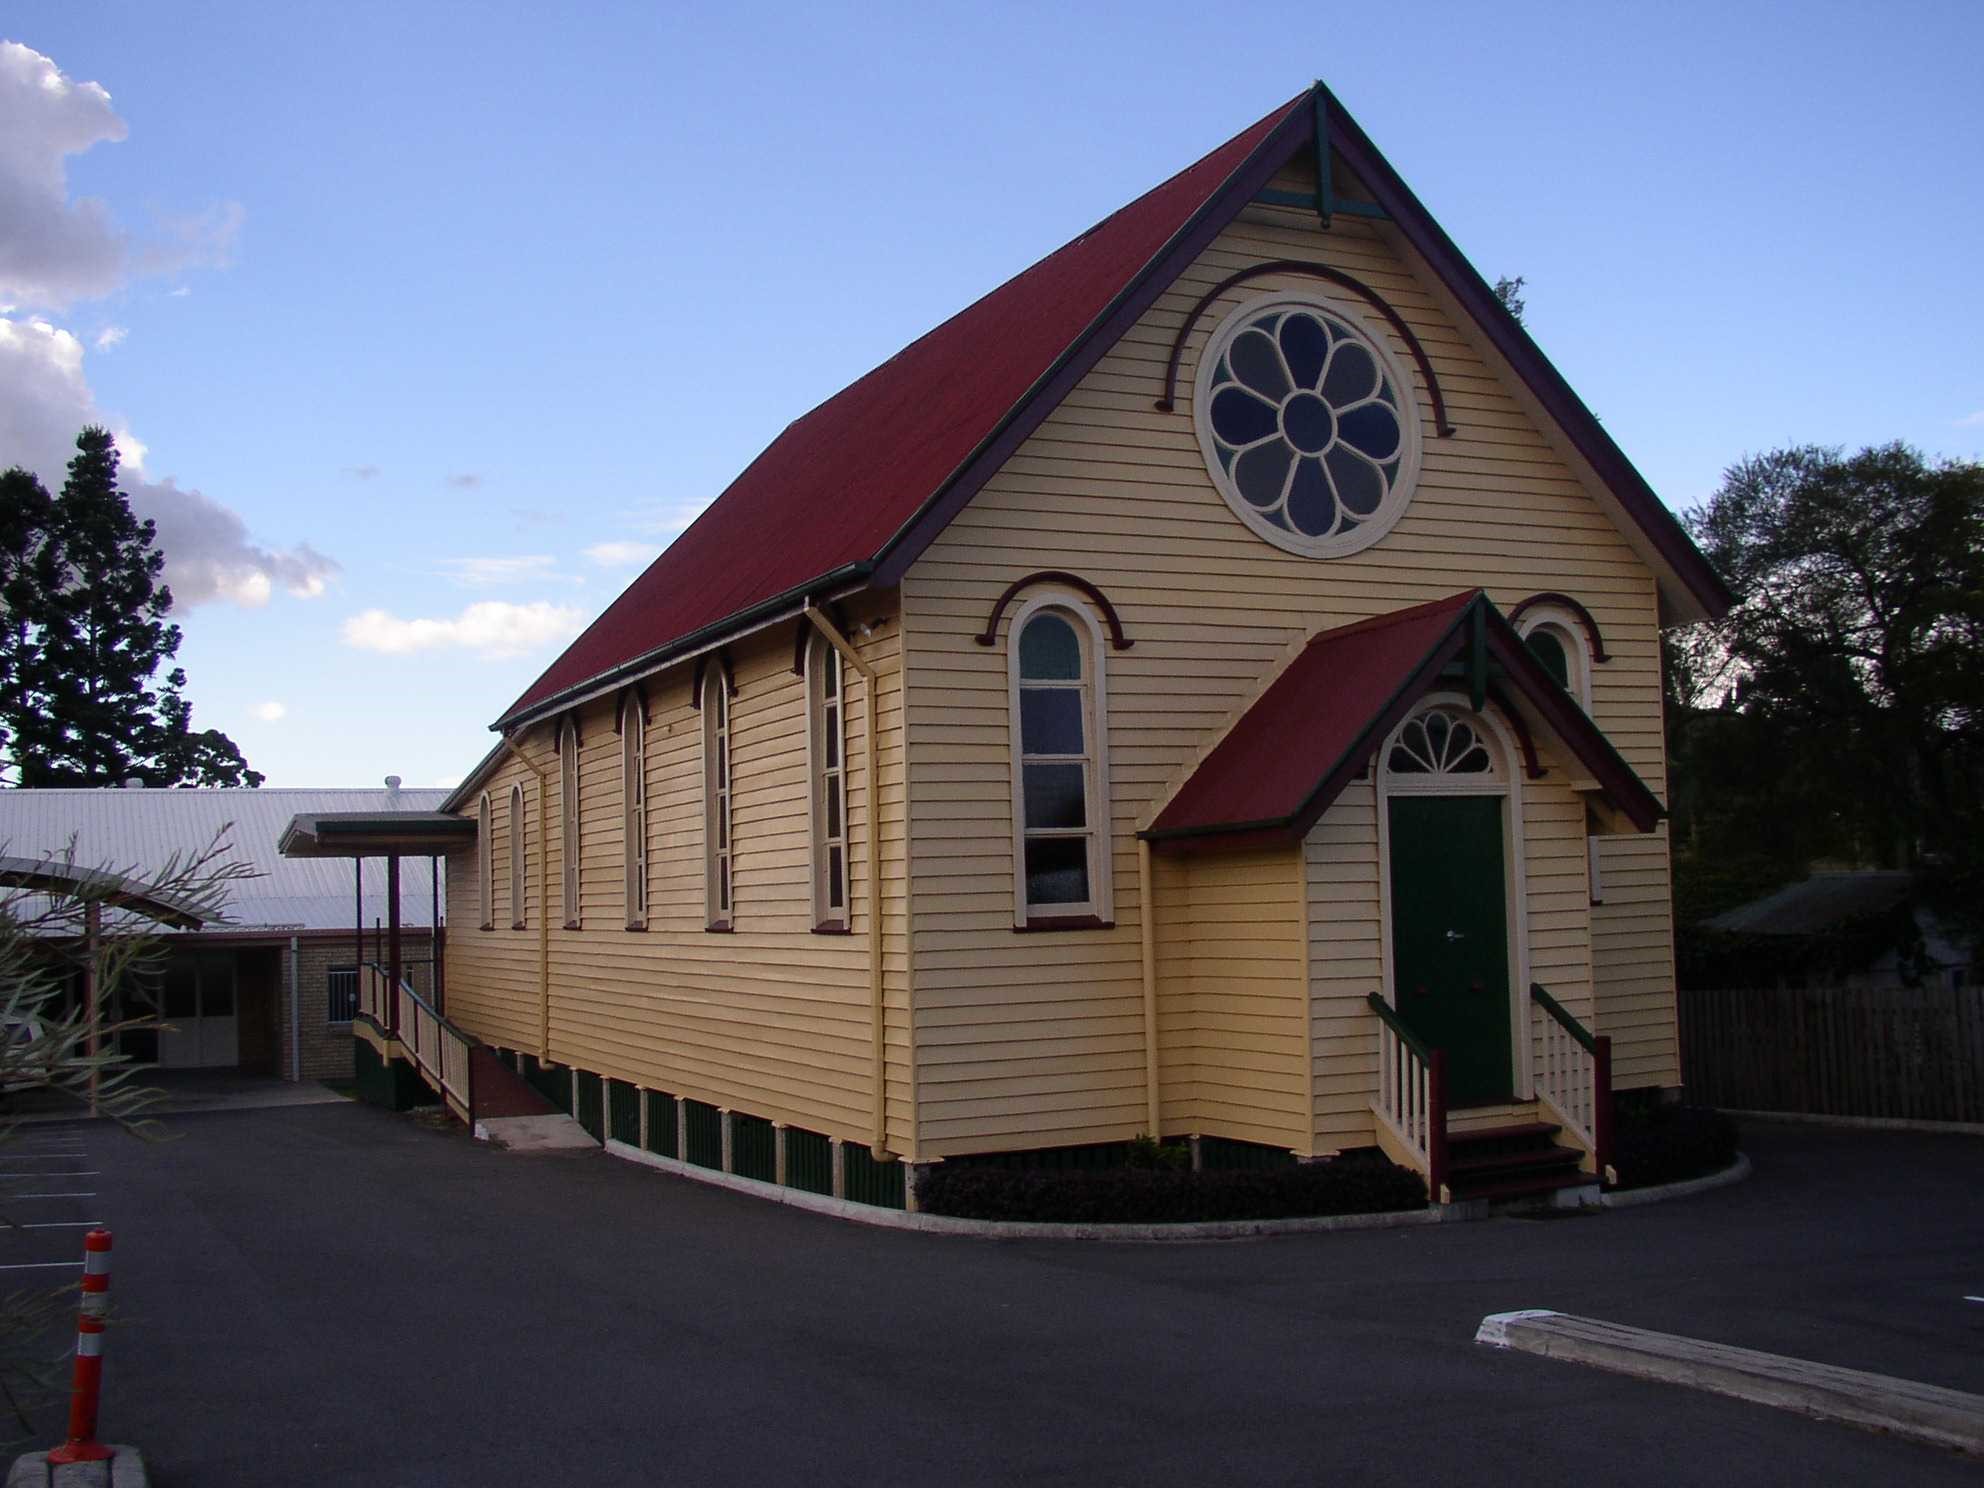 This is an image of the local heritage place known as Bald Hills Presbyterian Church